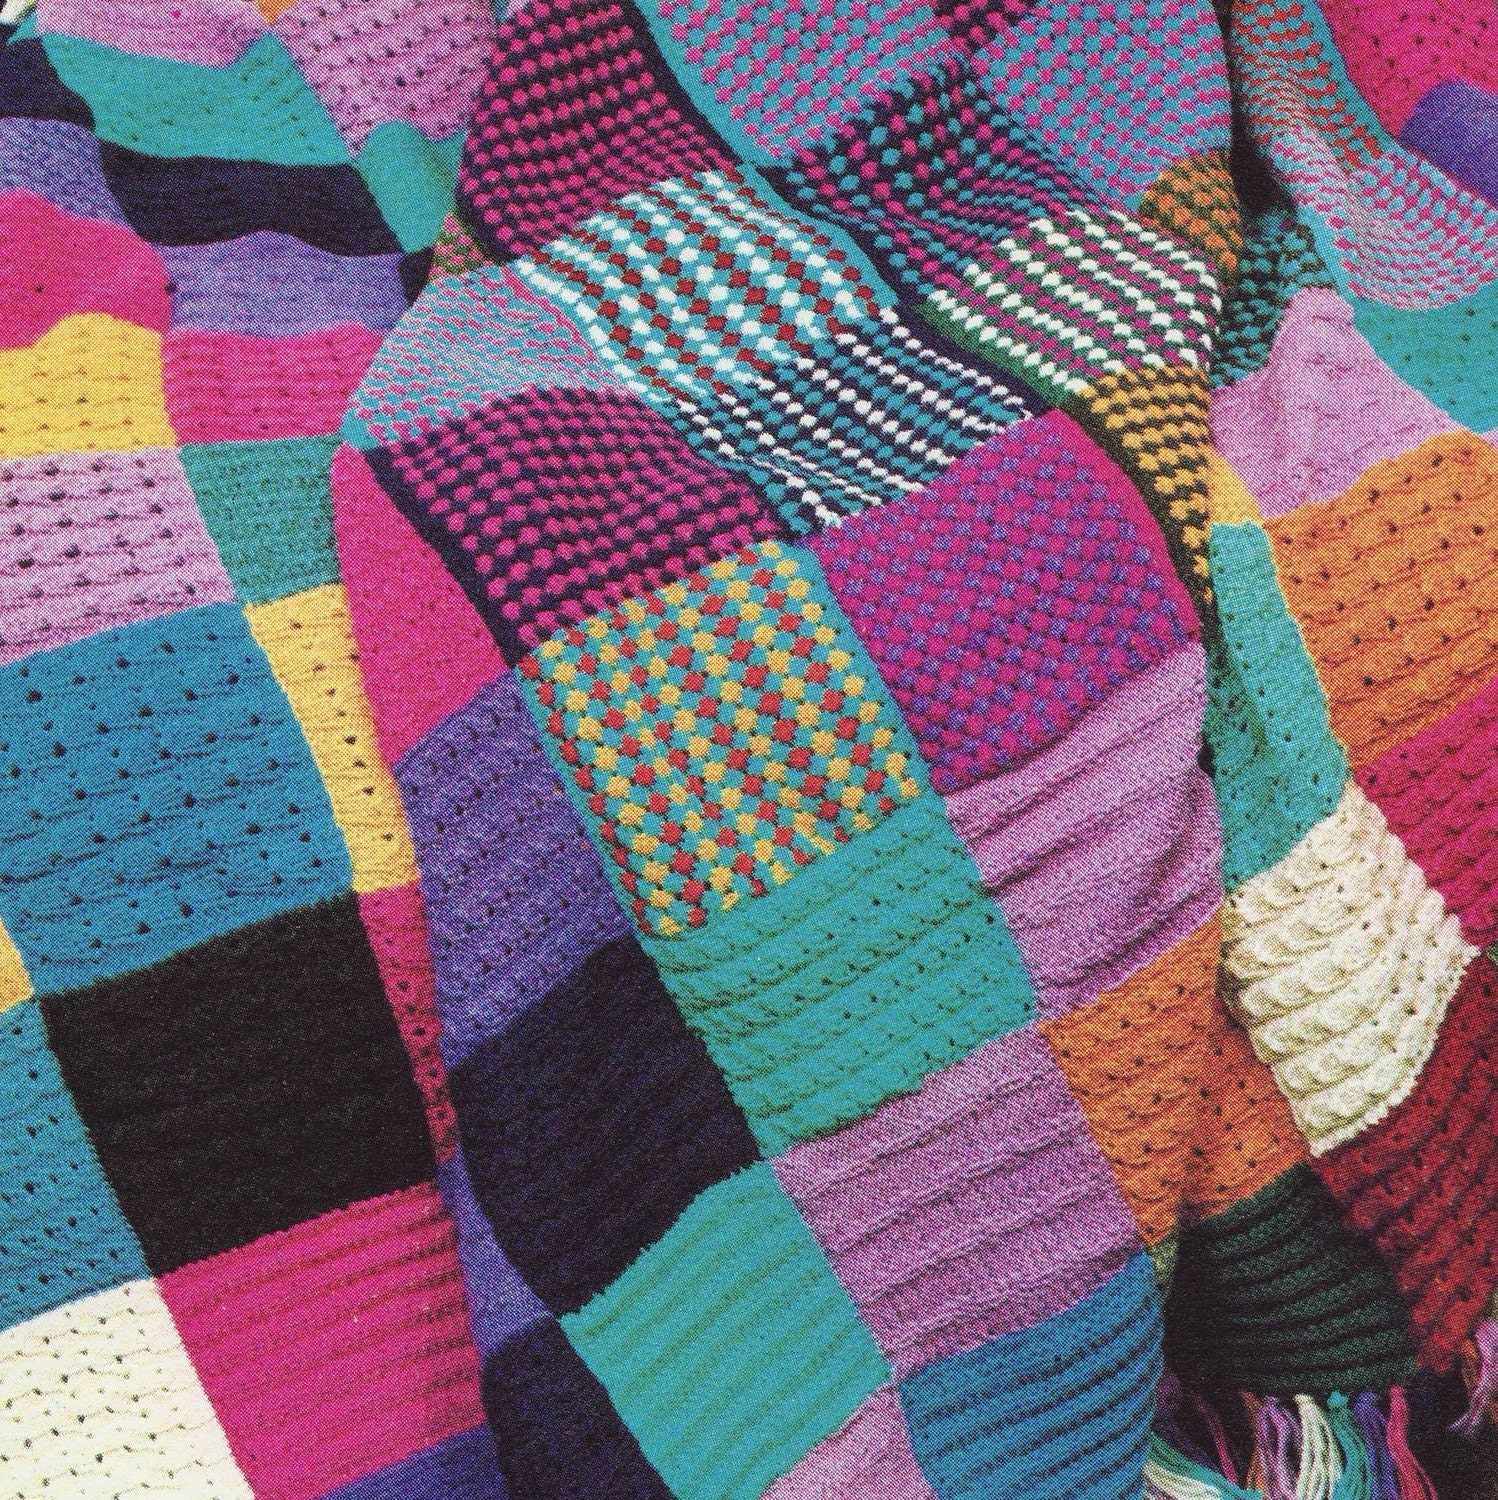 Sale - PDF KNITTING PATTERN for Squares Patchwork Throw Afghan  Vintage